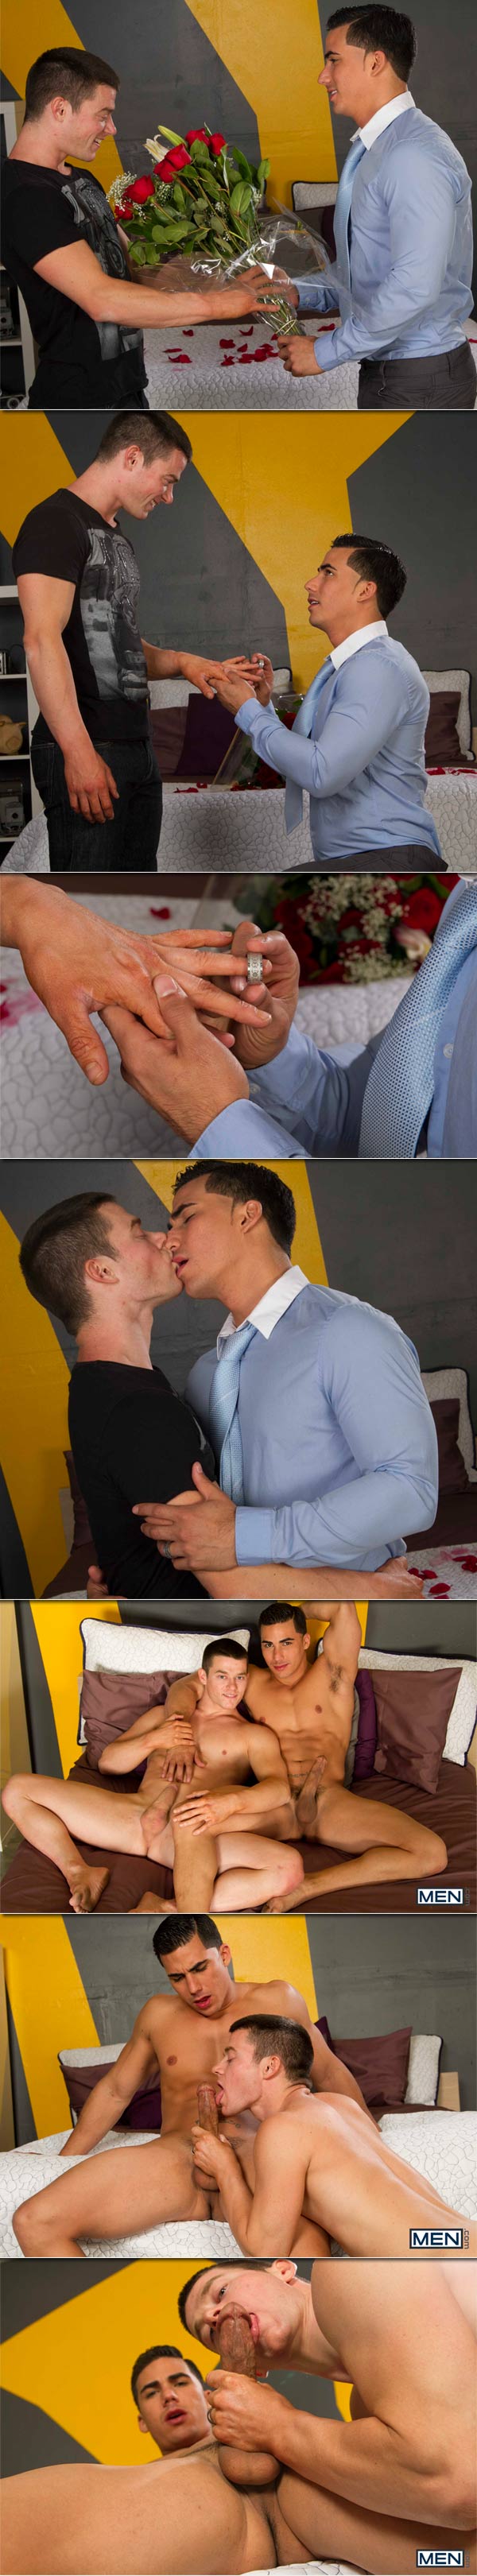 The Proposal (Topher DiMaggio & Chip Tanner) at Gods Of Men